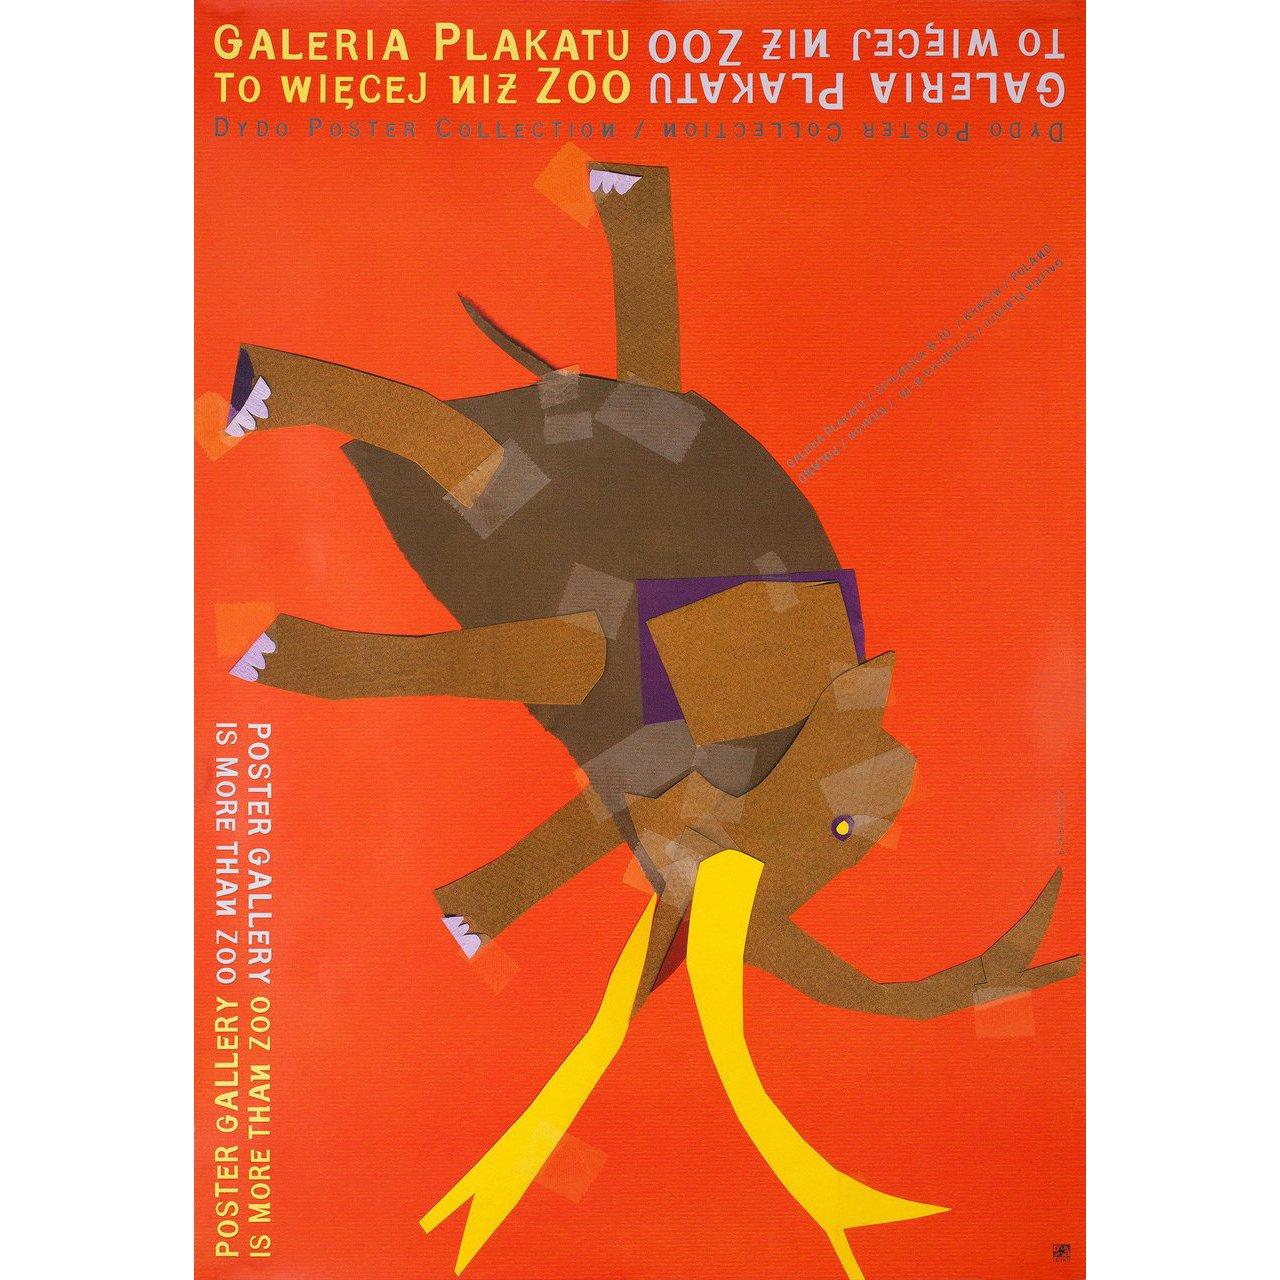 Contemporary Poster Gallery Is More than Zoo 2000s Polish B1 Exhibition Poster